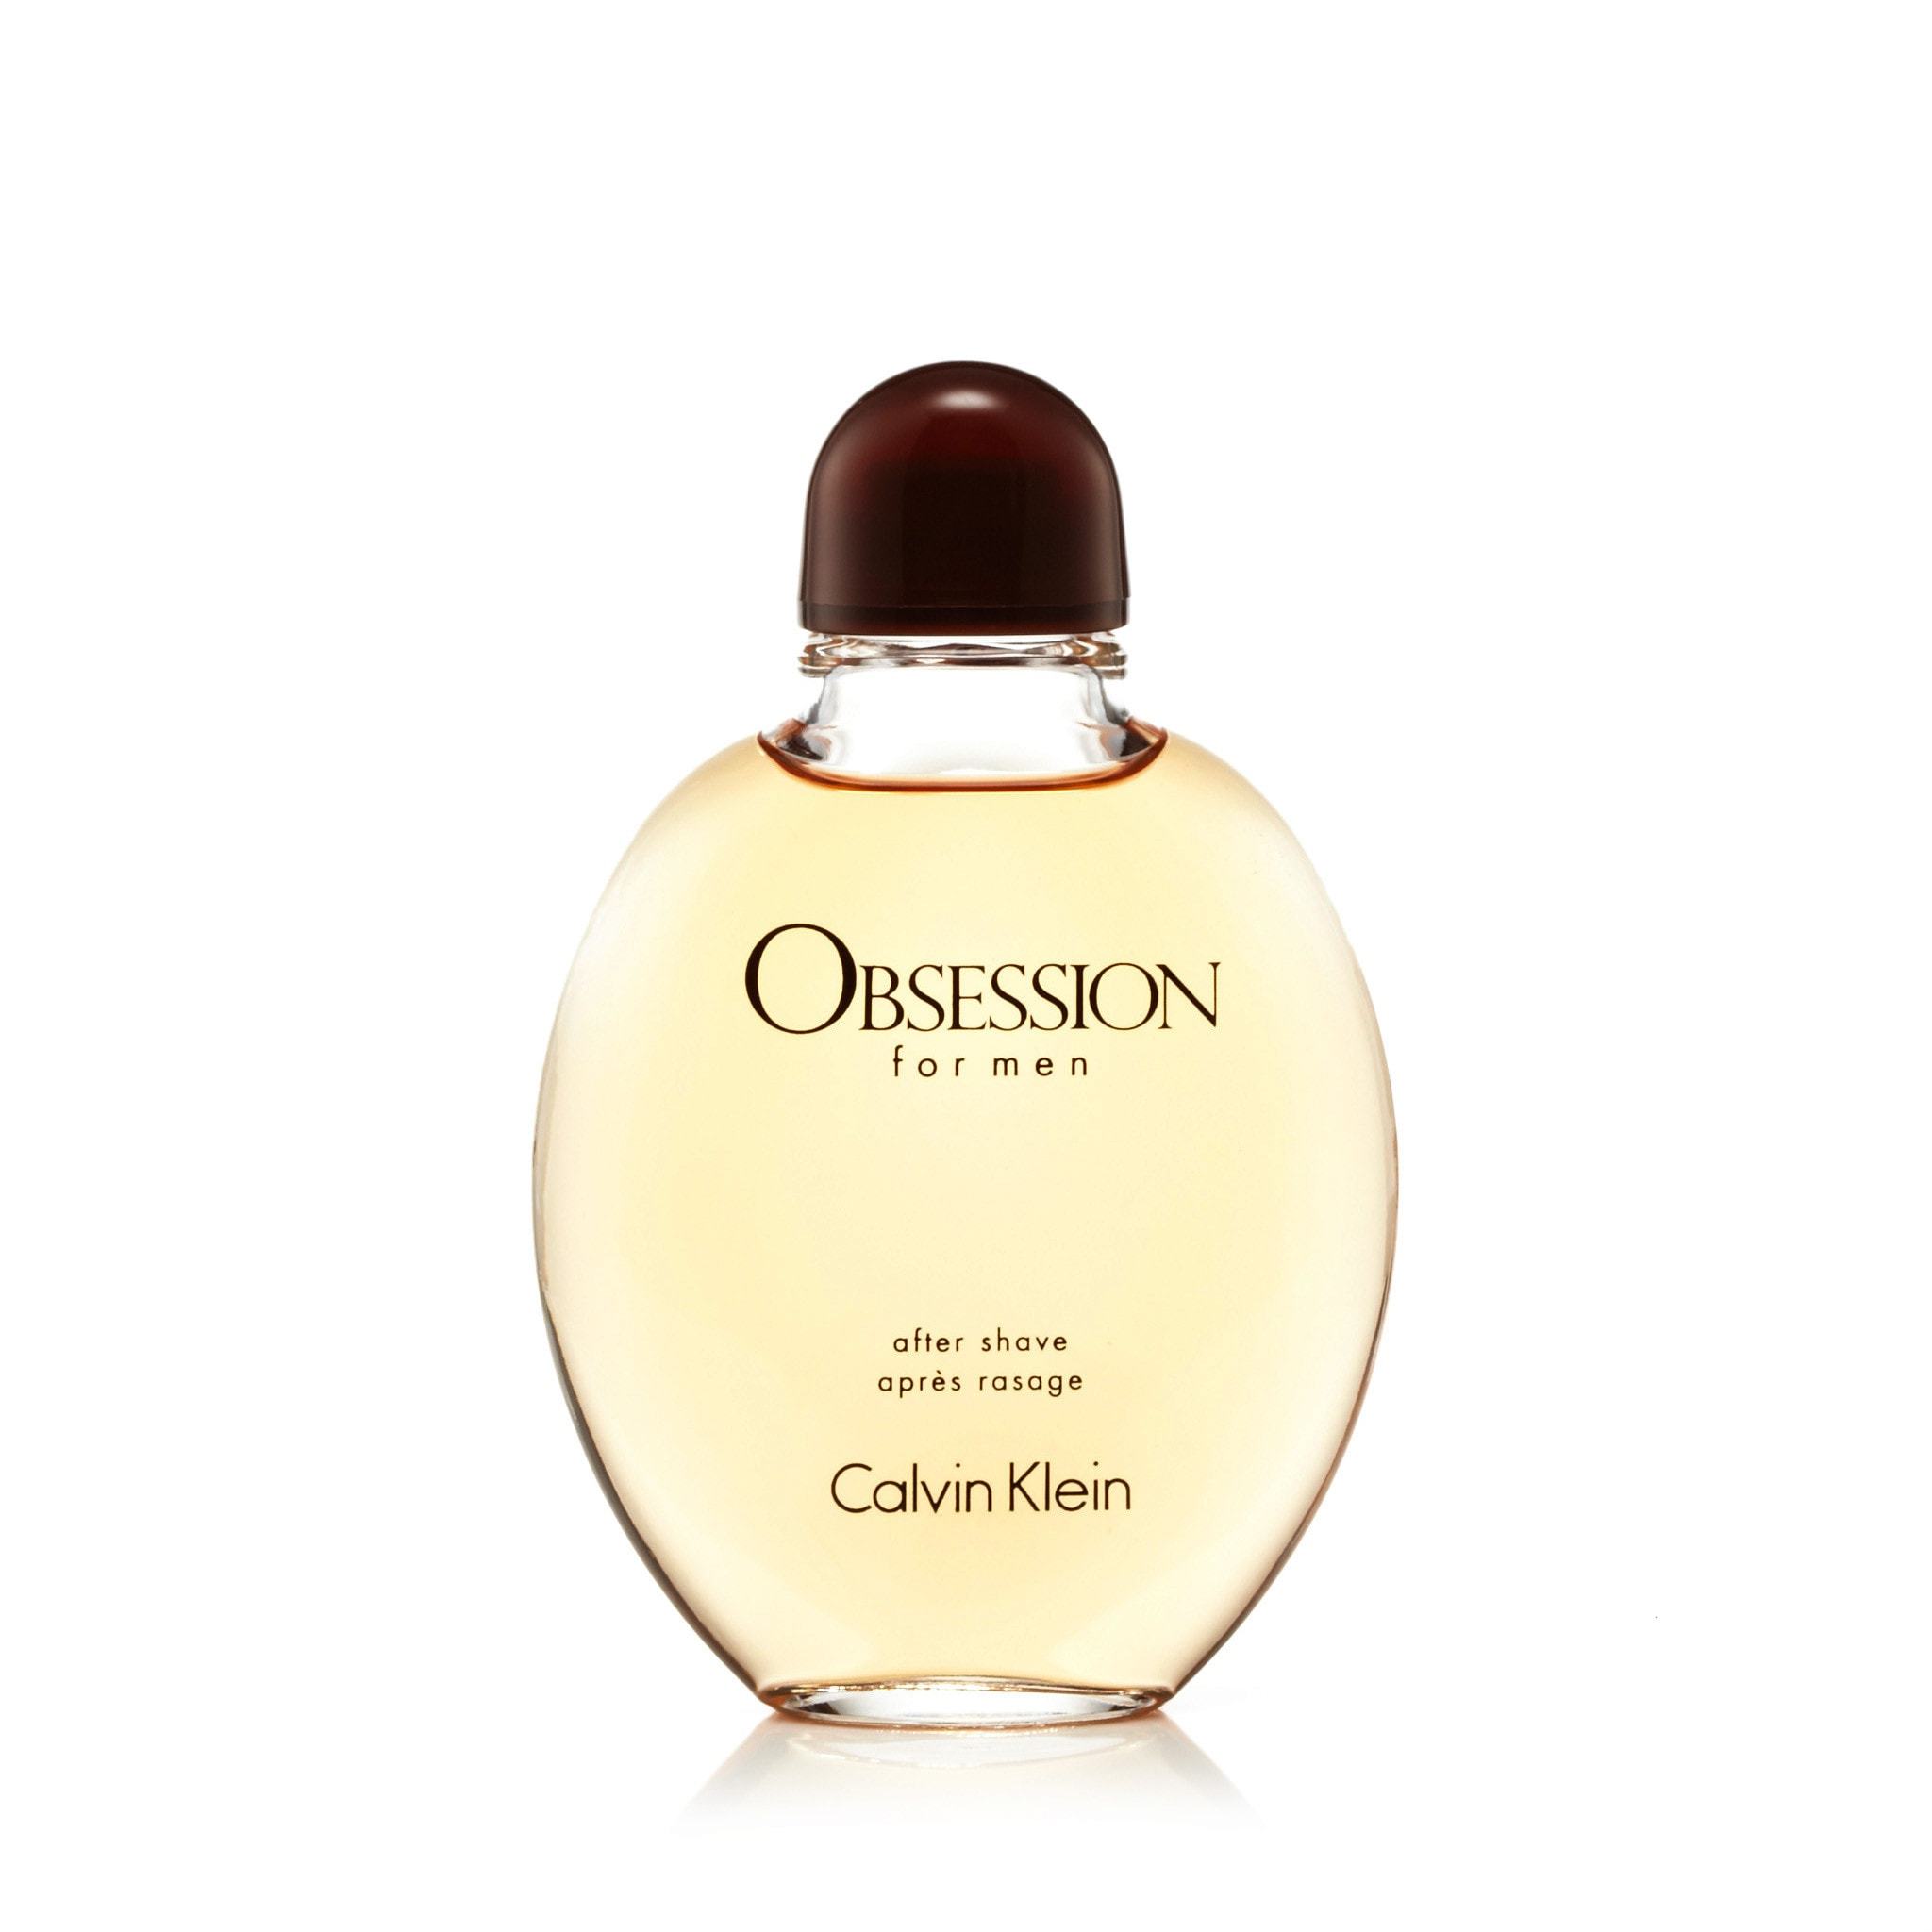 Obsession by Calvin Klein 5 oz After Shave Balm for Men